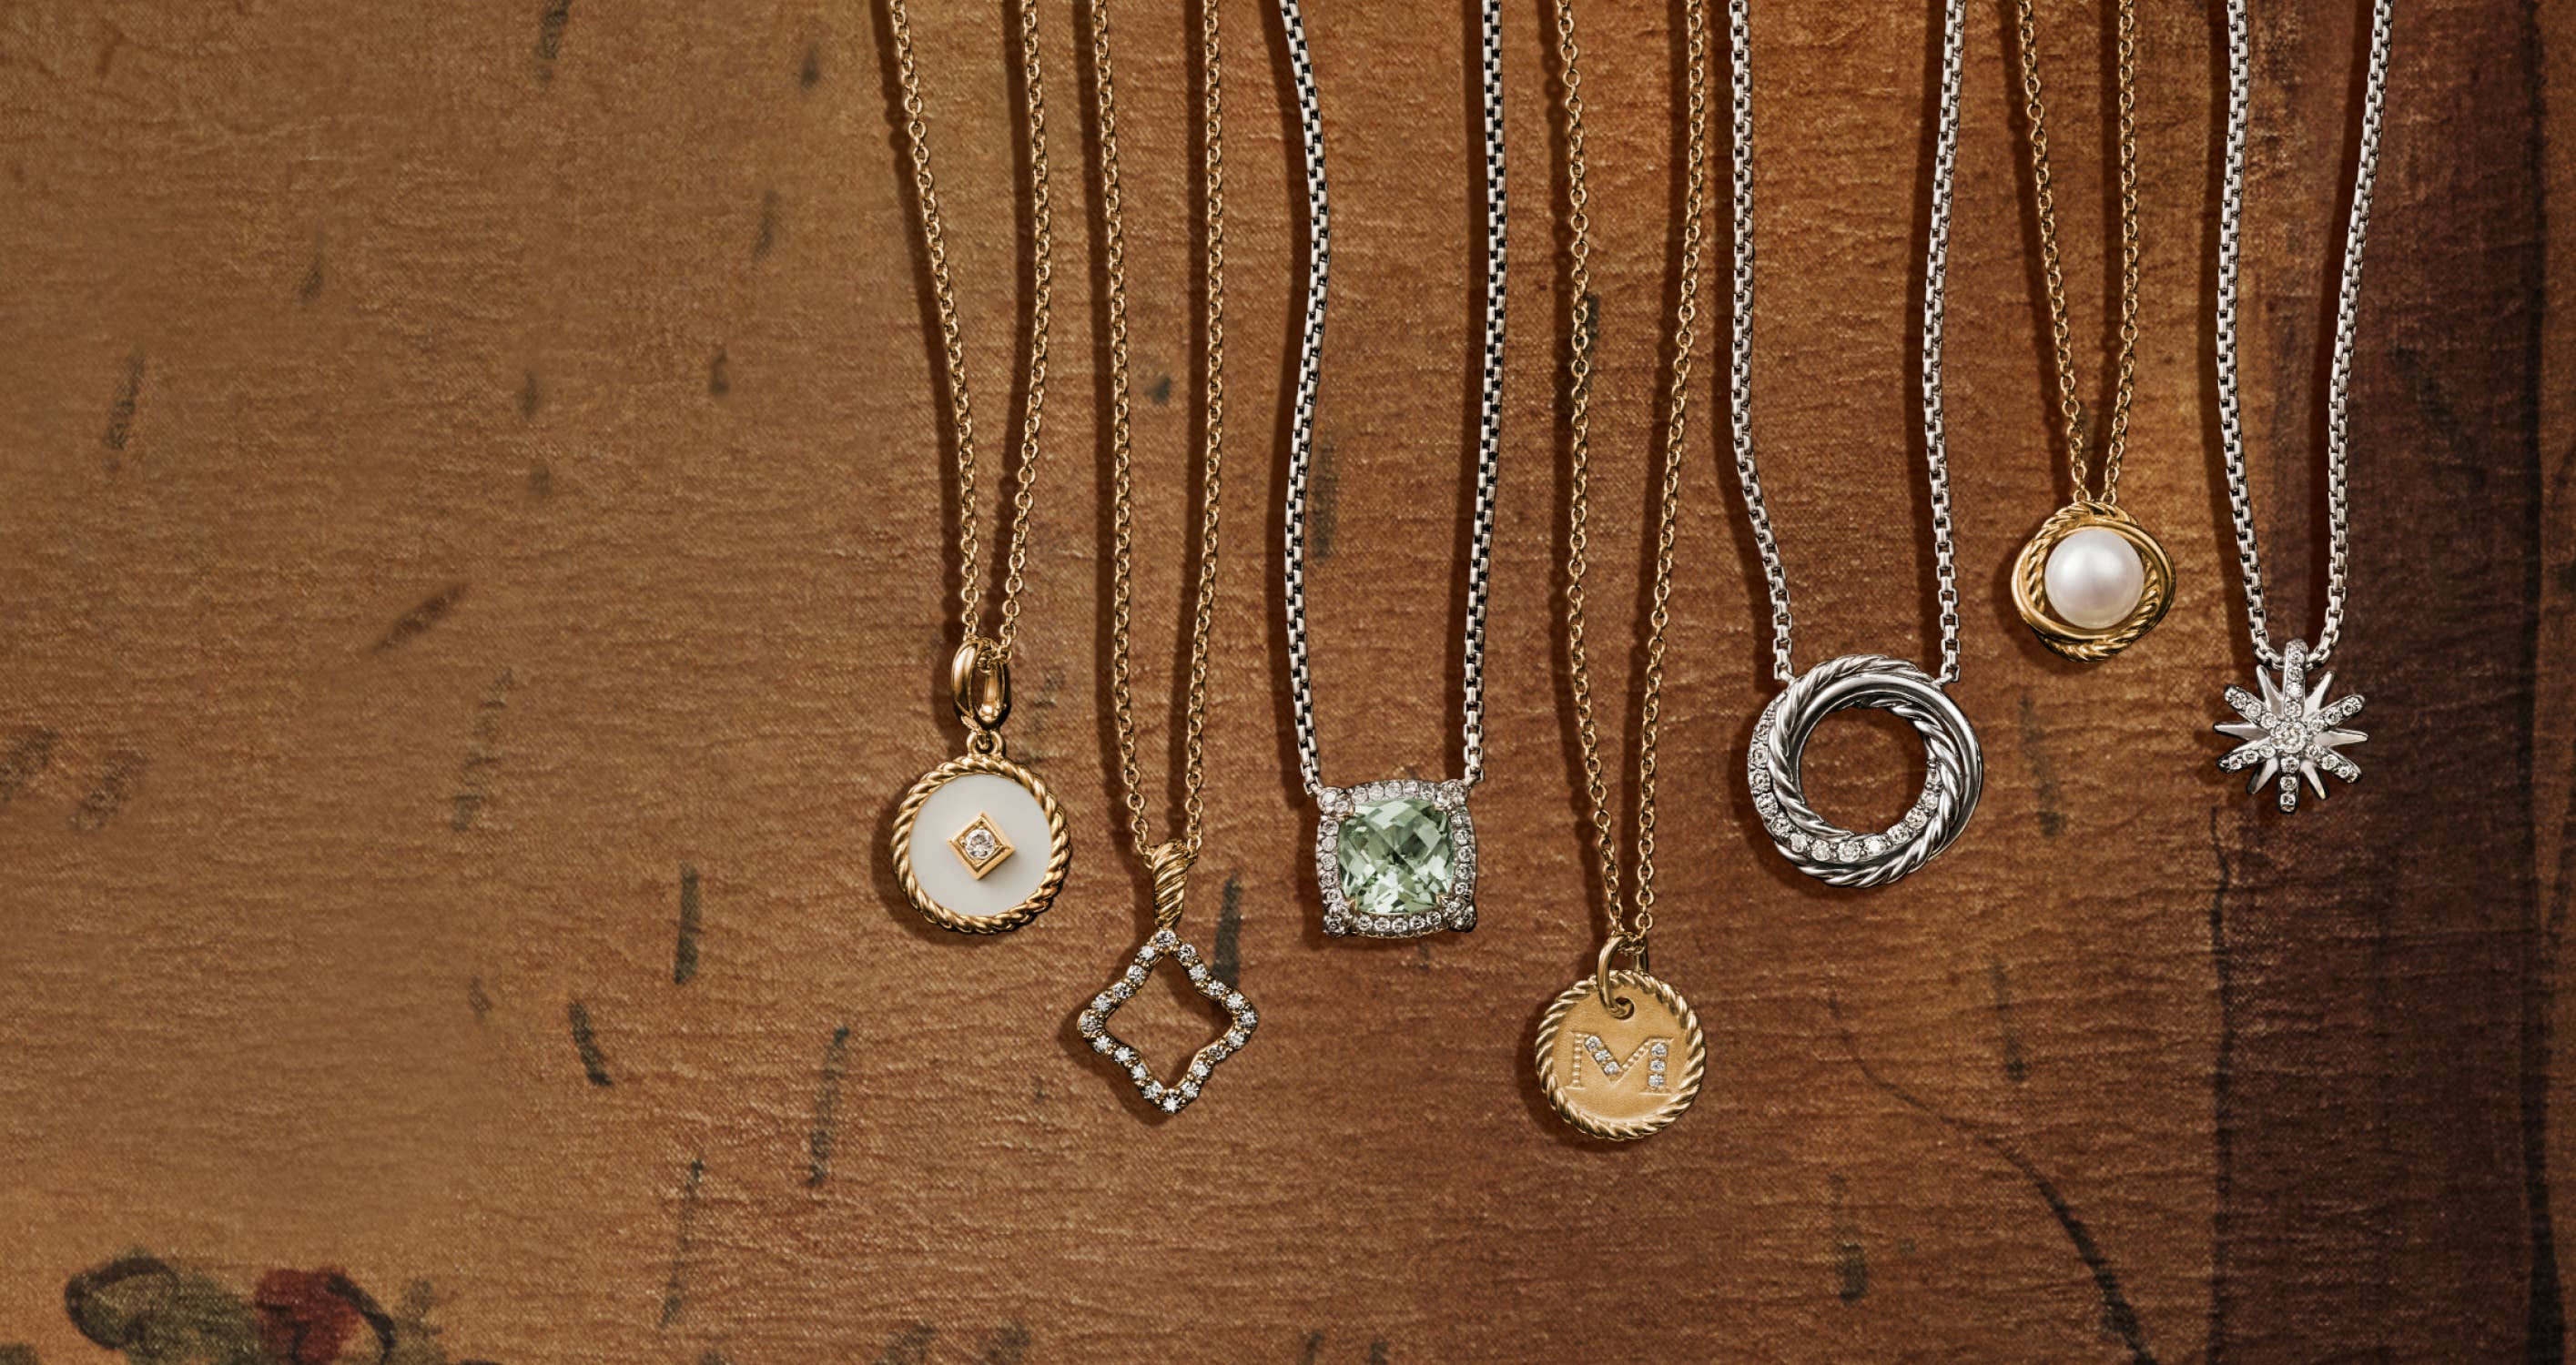 Gift Guide for her - Gifts under $1,000 featuring necklace, amulets and stones.